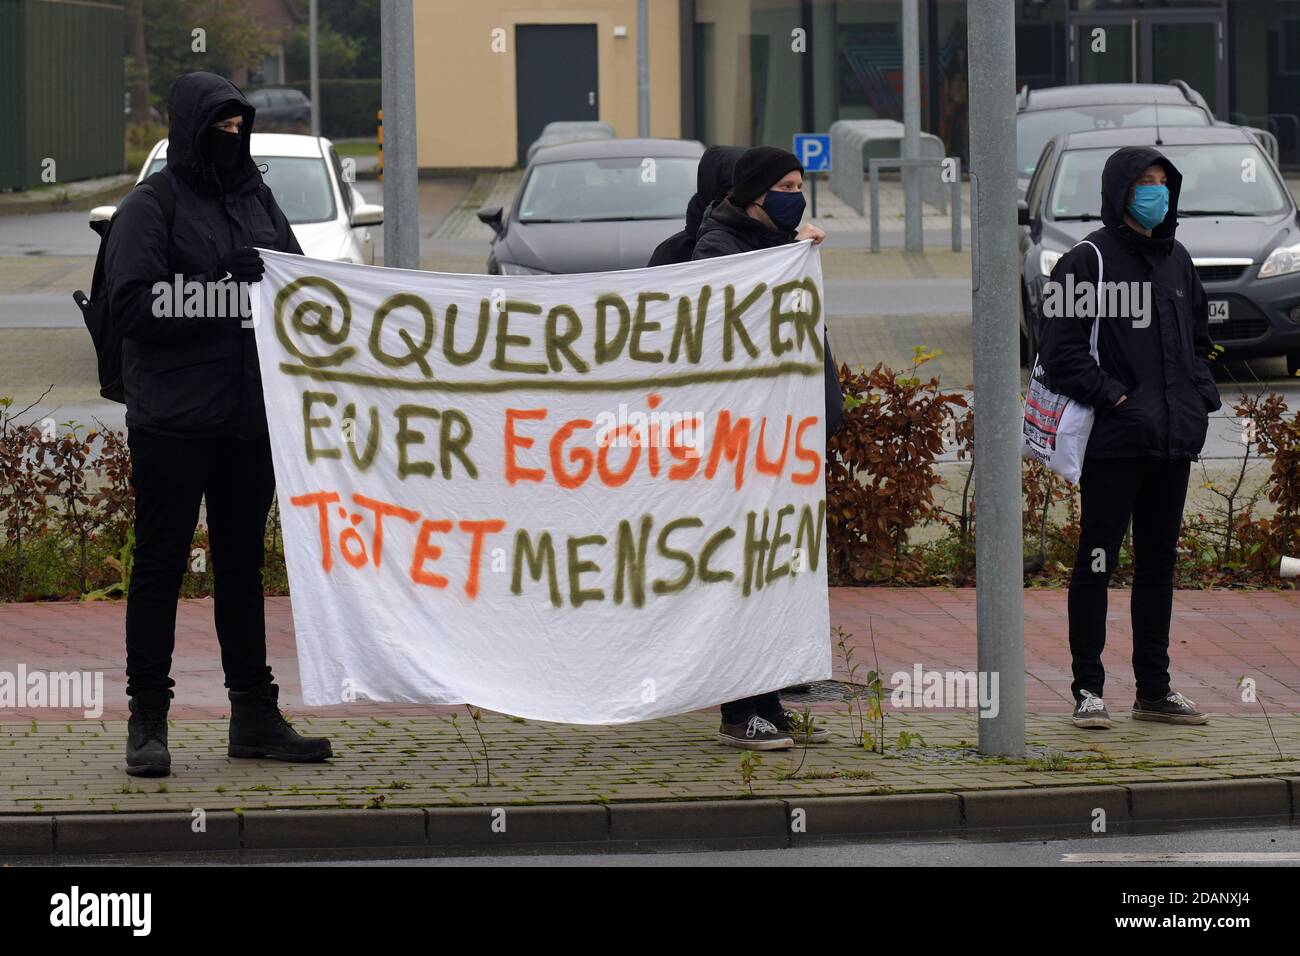 Aurich, Germany. 14th Nov, 2020. Counter-demonstrators hold a poster against the so-called 'lateral thinkers' with the inscription 'lateral thinkers your egoism kills people', while a lateral thinker demonstration passes them by. About 150 people protested against the demonstration of lateral thinkers. Credit: Michael Bahlo/dpa/Alamy Live News Stock Photo